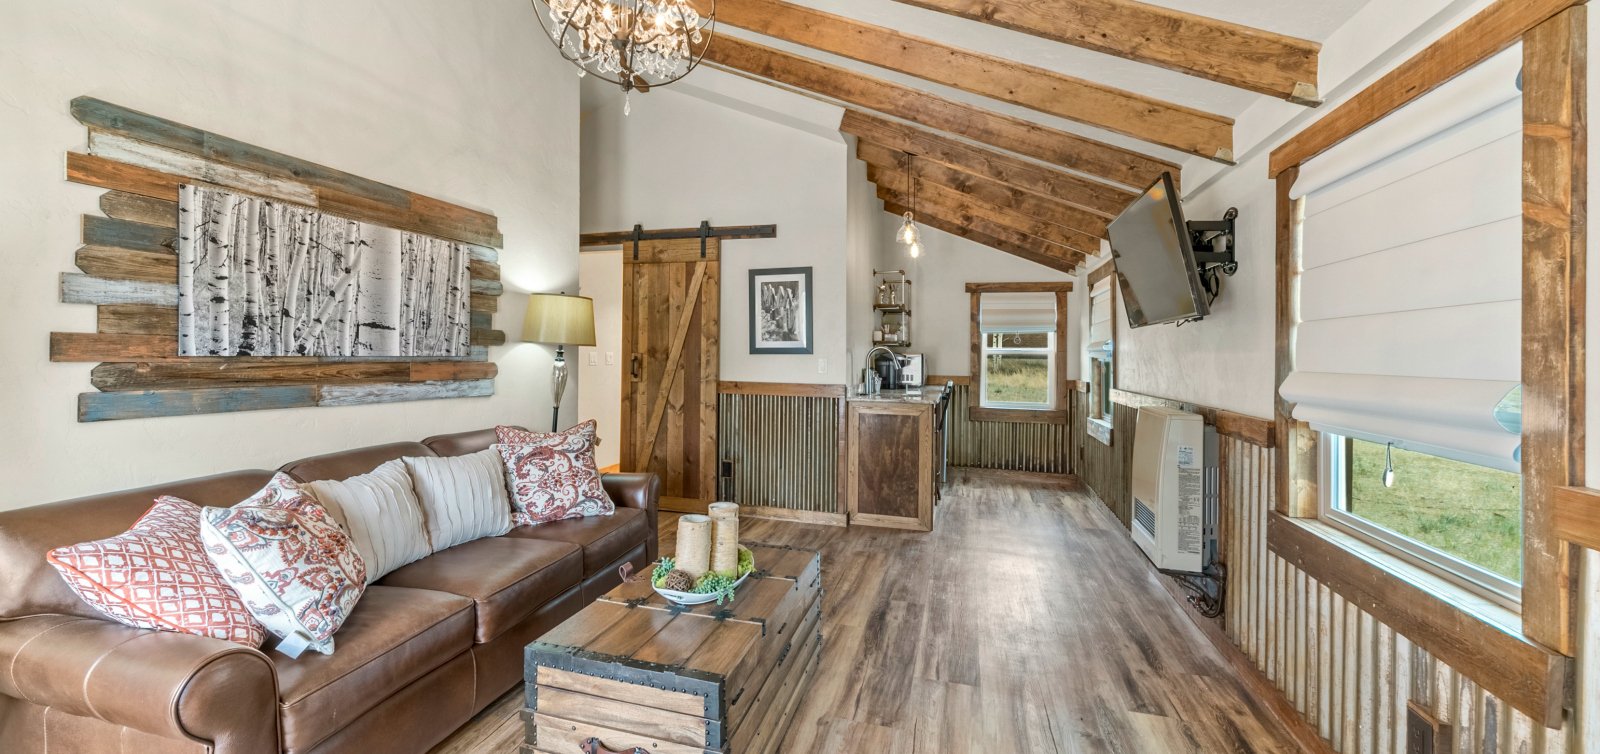 Interior of Family Cabin Living Space | Mountain River Lodge